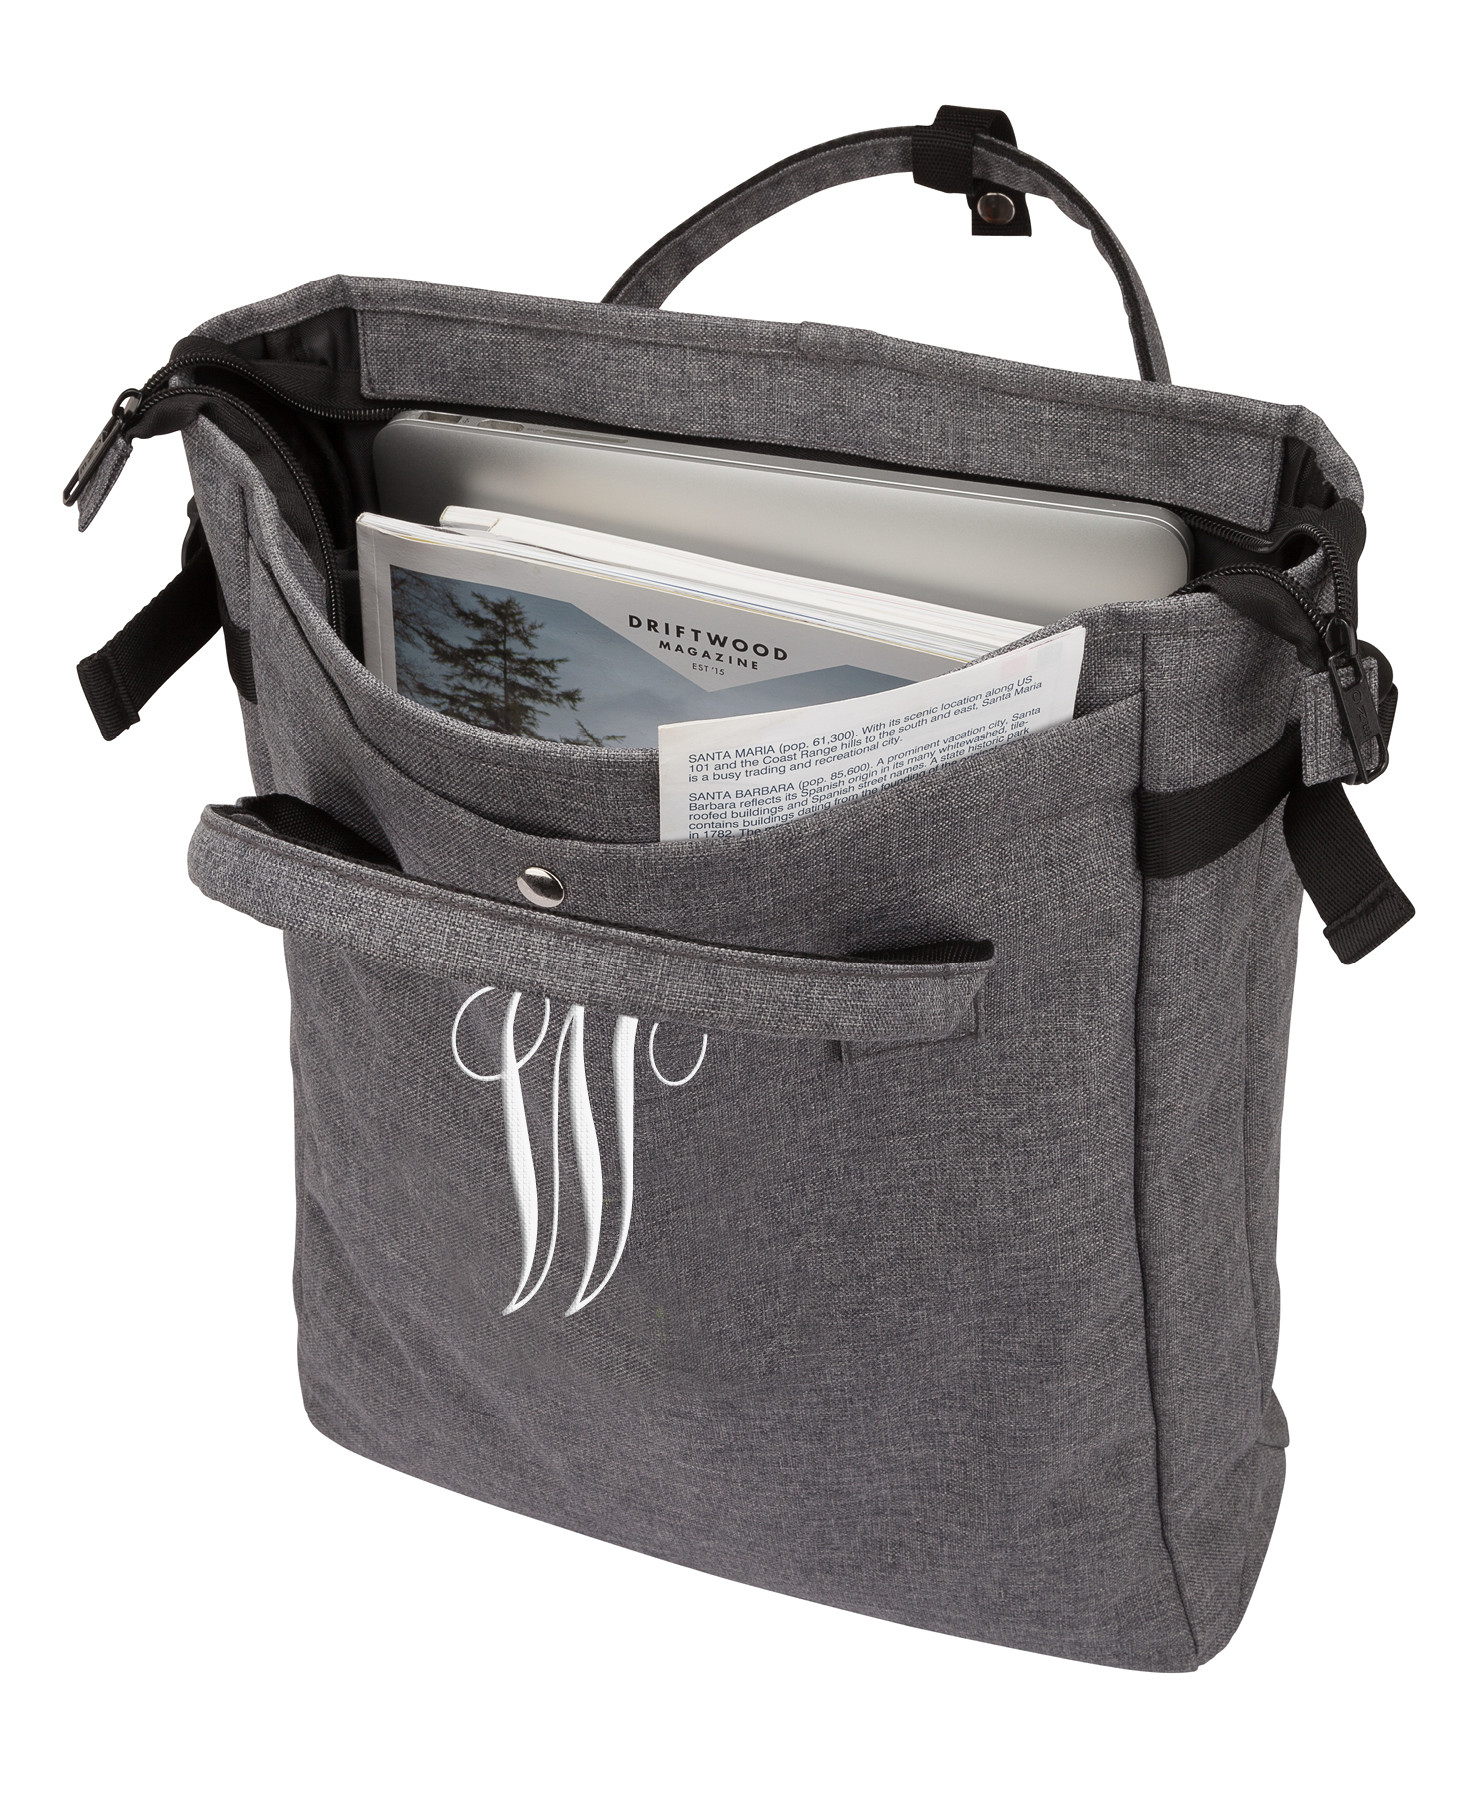 Personalized Messenger Laptop Briefcases - Add Your Embroidered Text,  Monogram or Logo - Custom Shoulder Bag